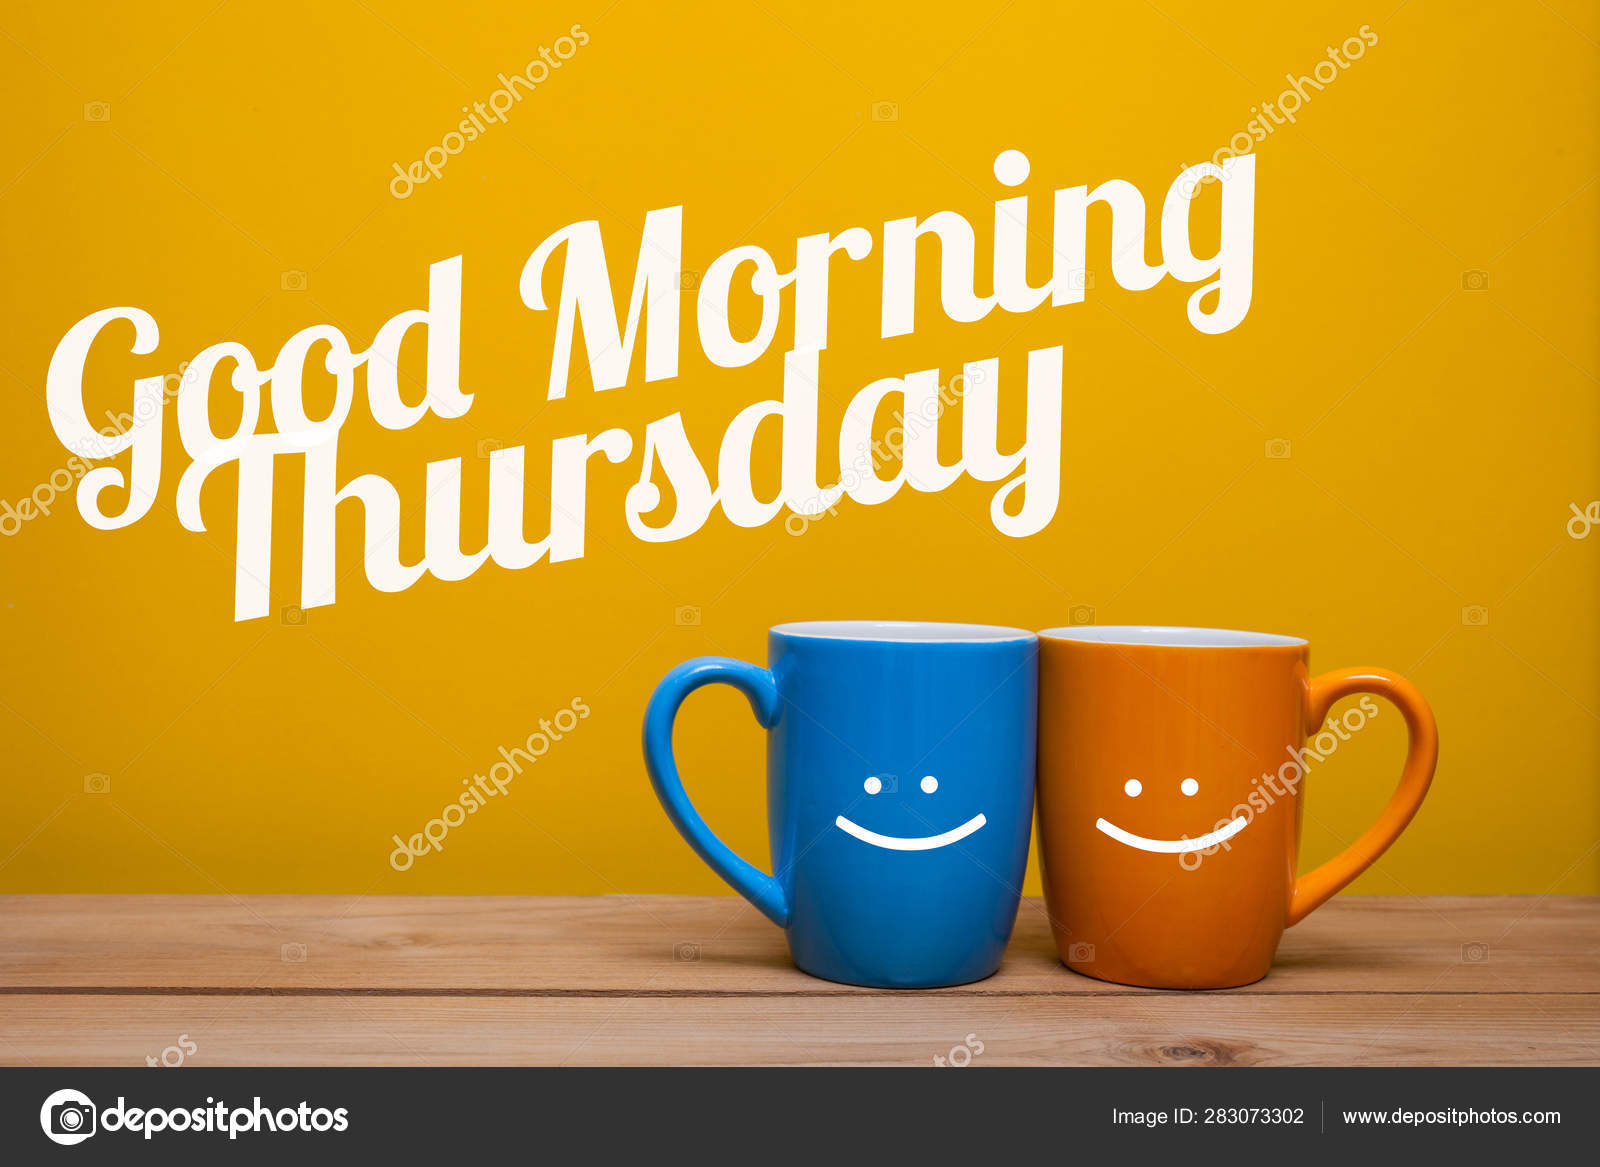 Good morning thursday Coffee Cup Concept isolated on yellow ...